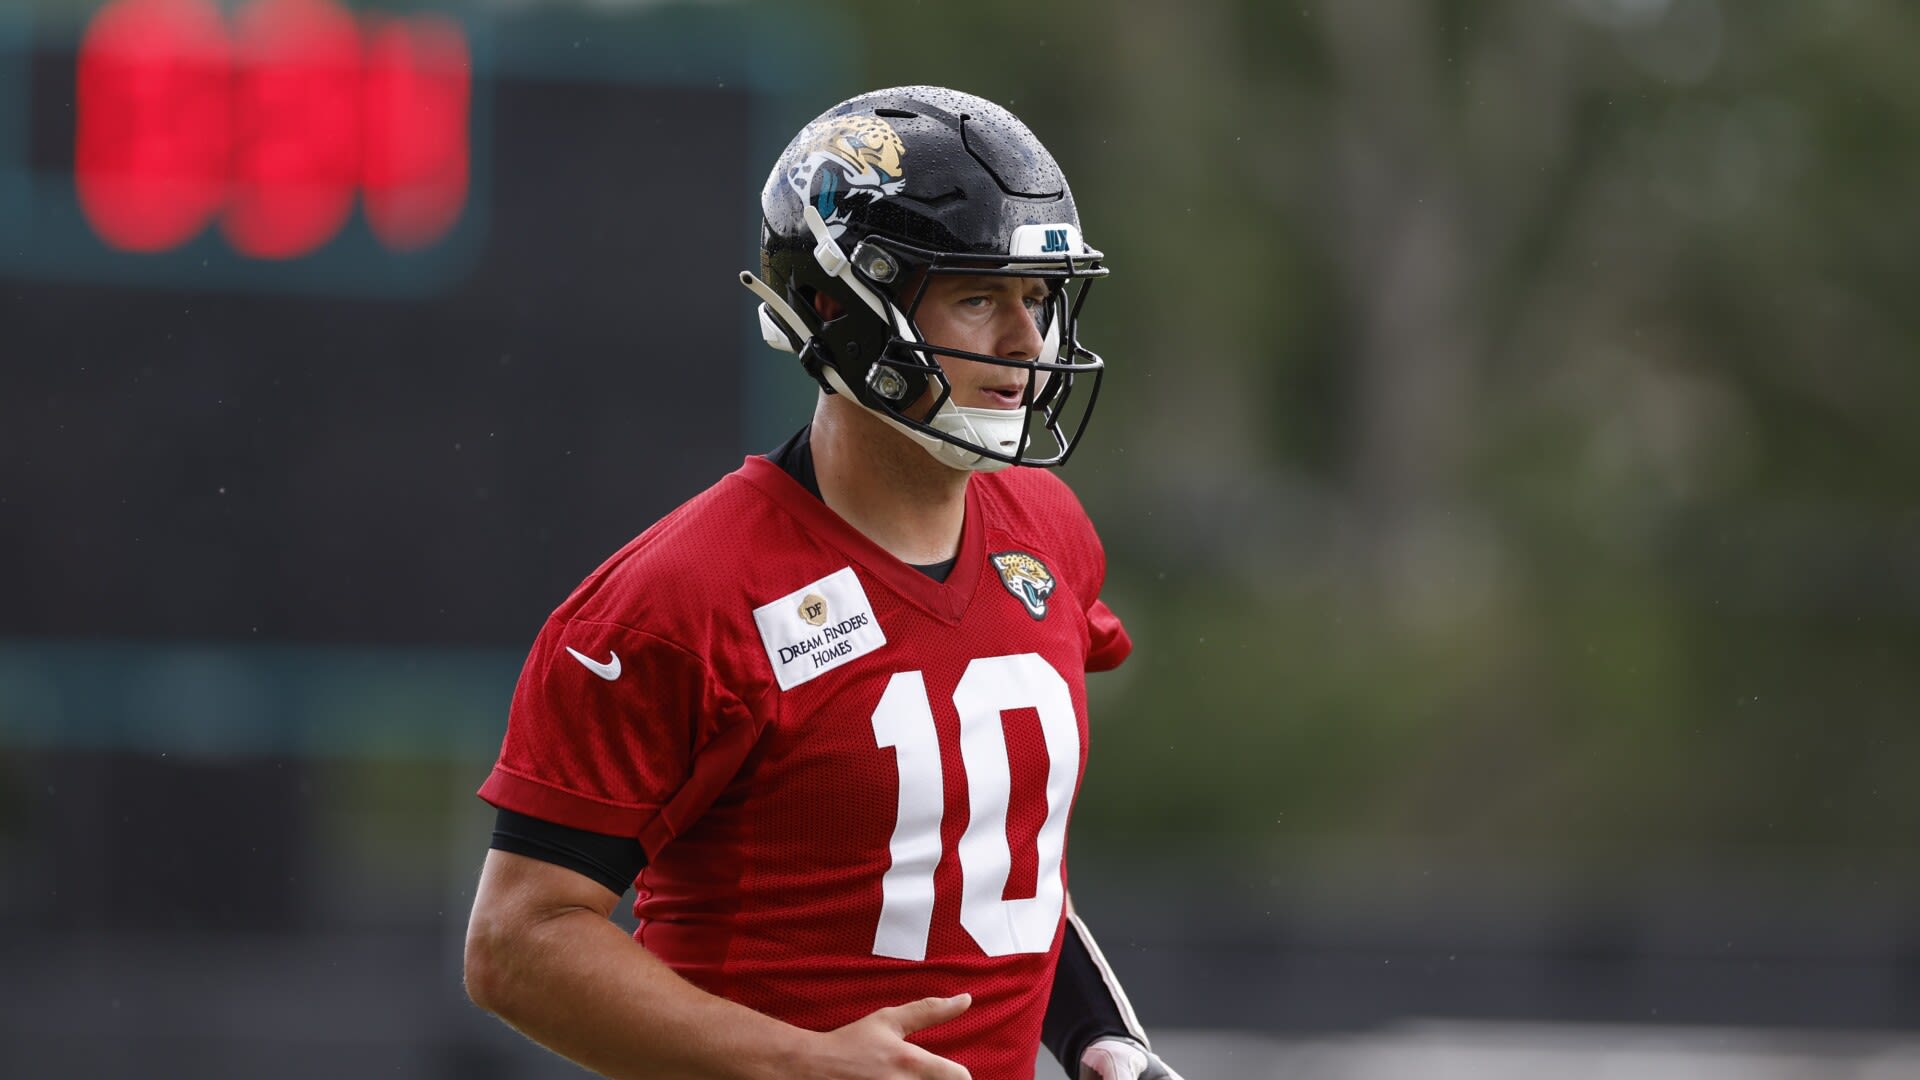 Doug Pederson on Mac Jones: A change of scenery is sometimes good for players